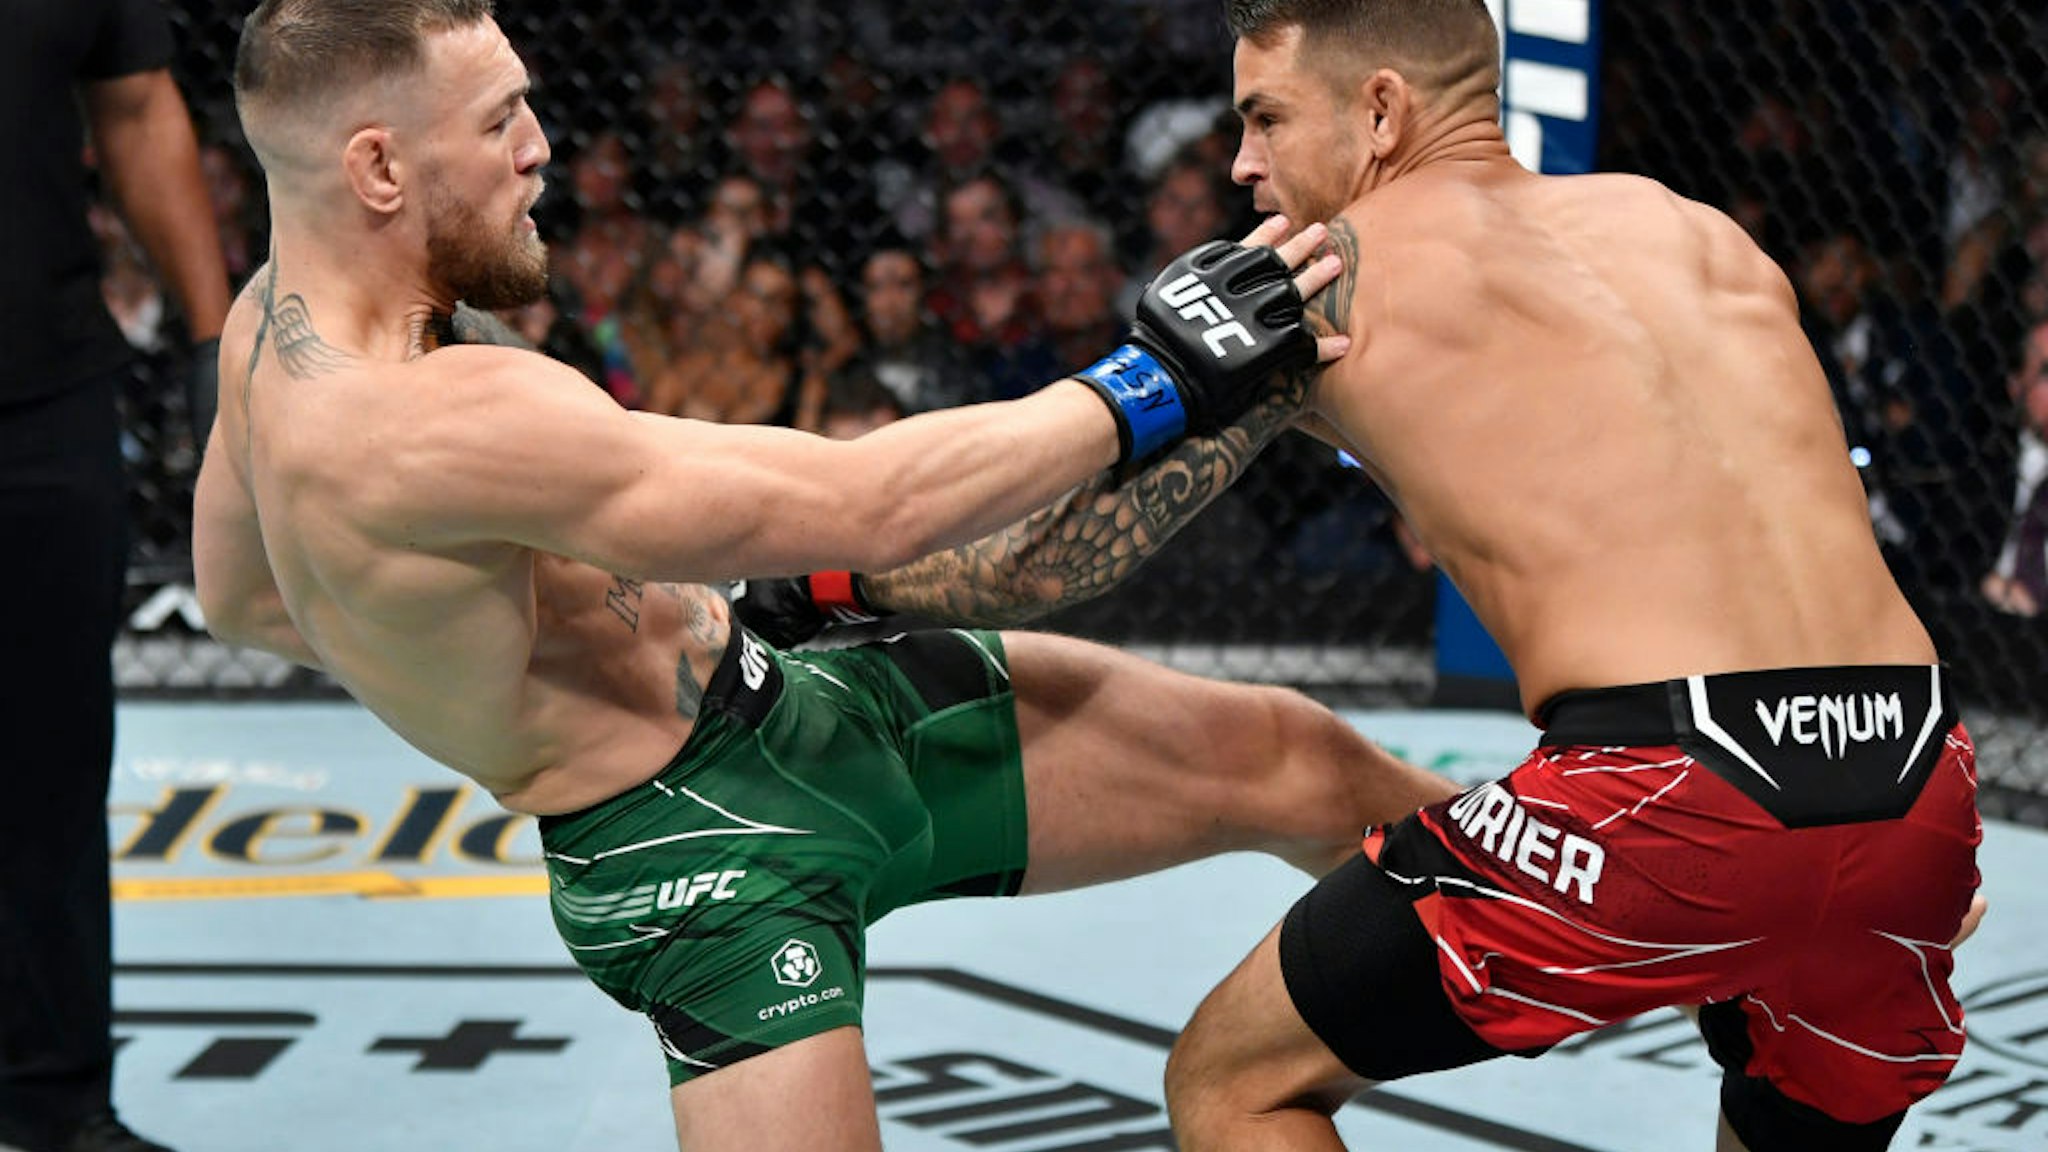 LAS VEGAS, NEVADA - JULY 10: (L-R) Conor McGregor of Ireland kicks Dustin Poirier in their welterweight fight during the UFC 264 event at T-Mobile Arena on July 10, 2021 in Las Vegas, Nevada. (Photo by Jeff Bottari/Zuffa LLC)